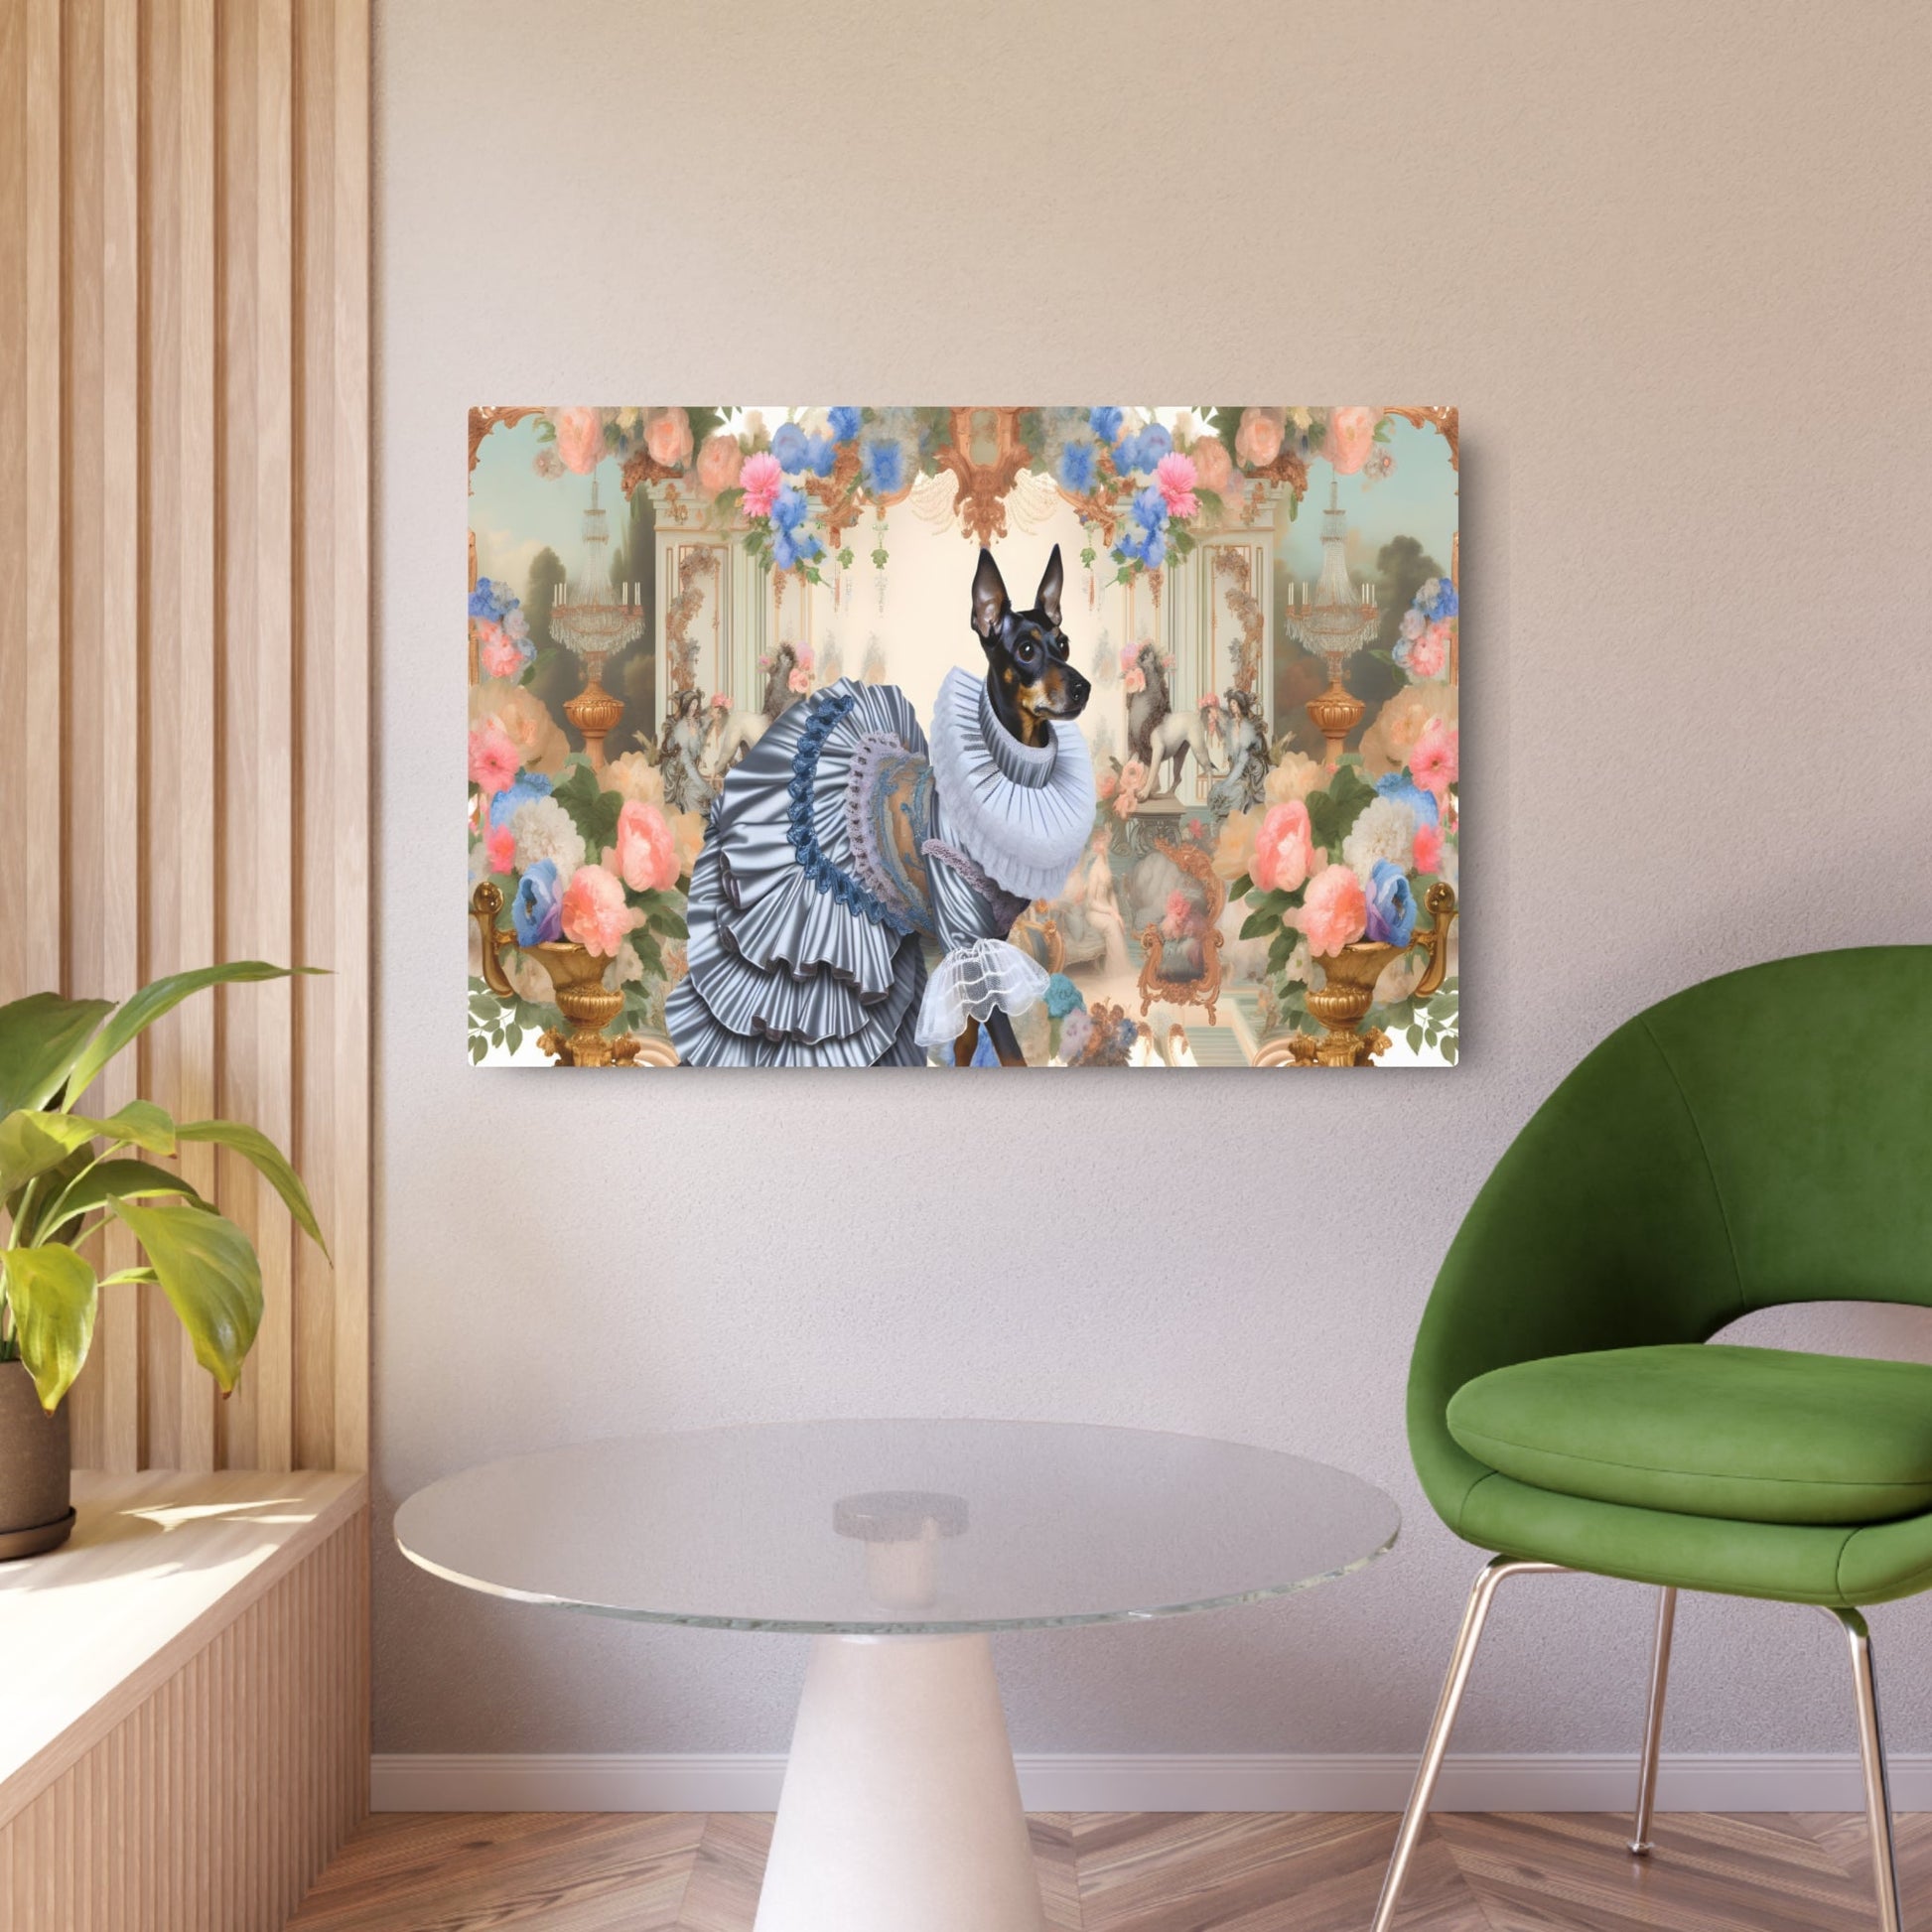 Metal Poster Art | "Rococo-Style Dog Artwork: 18th Century French Aristocratic Elegance in Pastel Colors and Gold Accents under Western - Metal Poster Art 36″ x 24″ (Horizontal) 0.12''